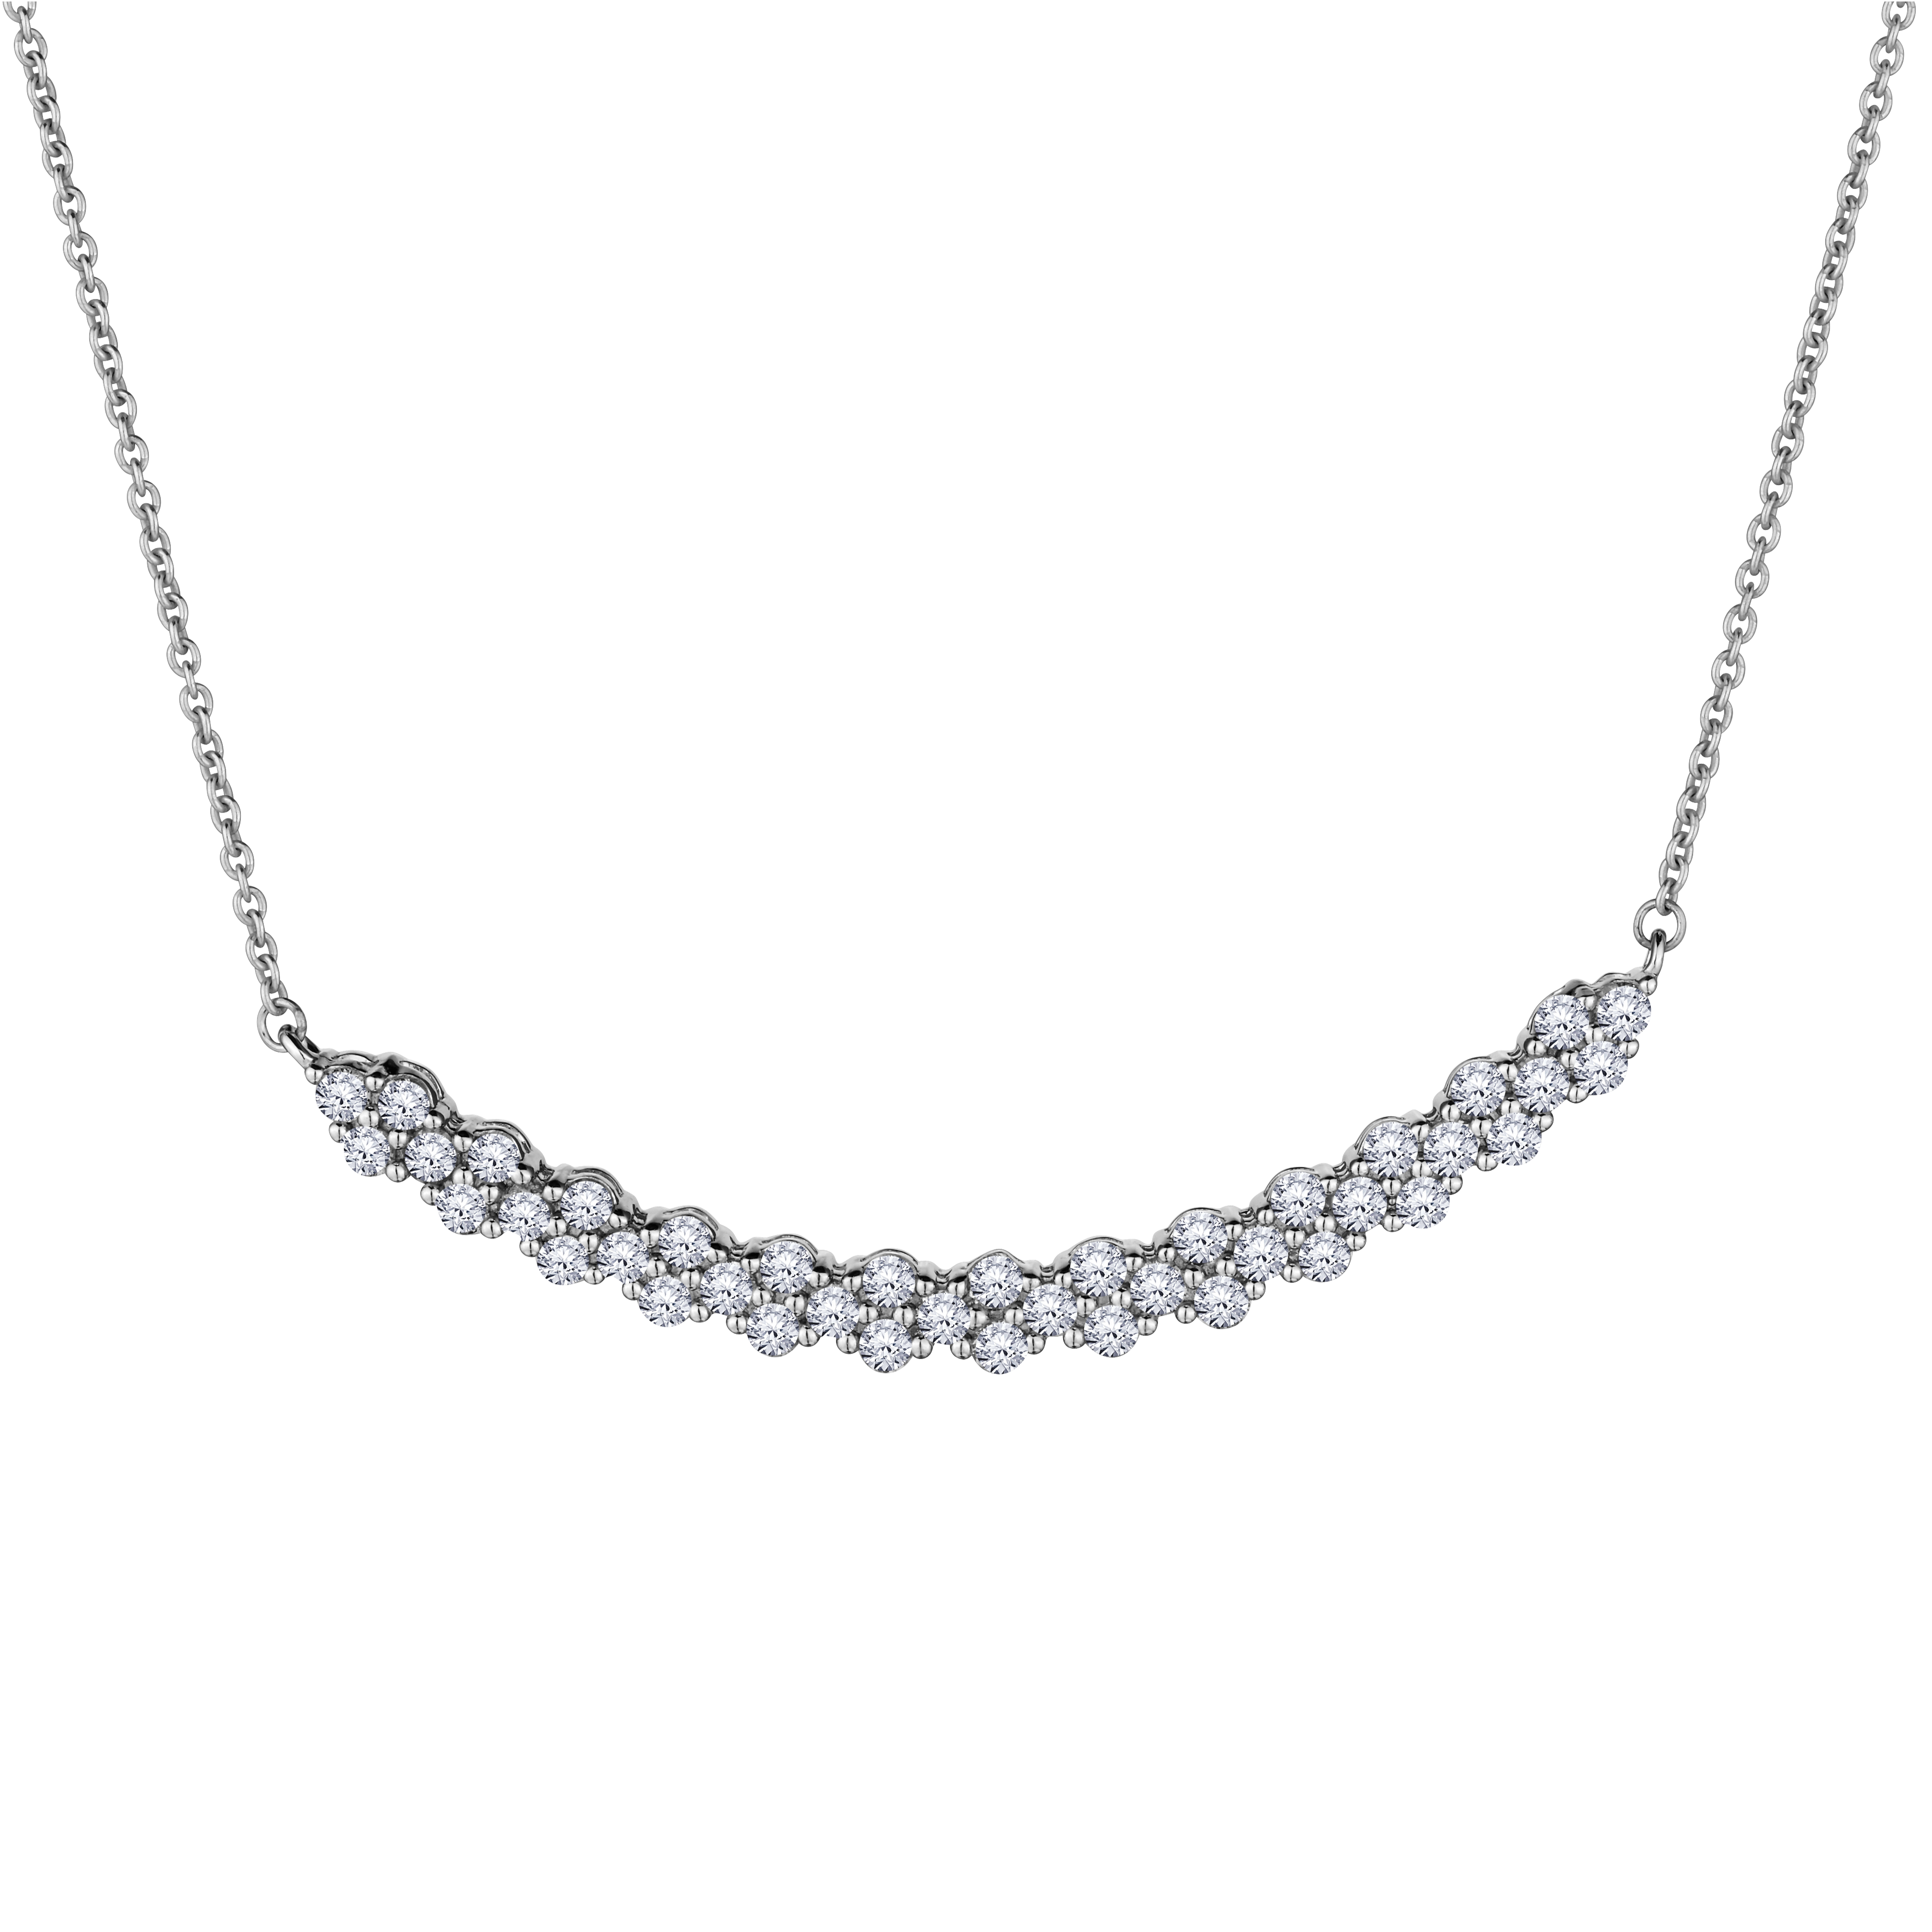 1.00 Carat "Elegance" Diamond Necklace, 10kt White Gold. Necklaces and Pendants. Griffin Jewellery Designs. 